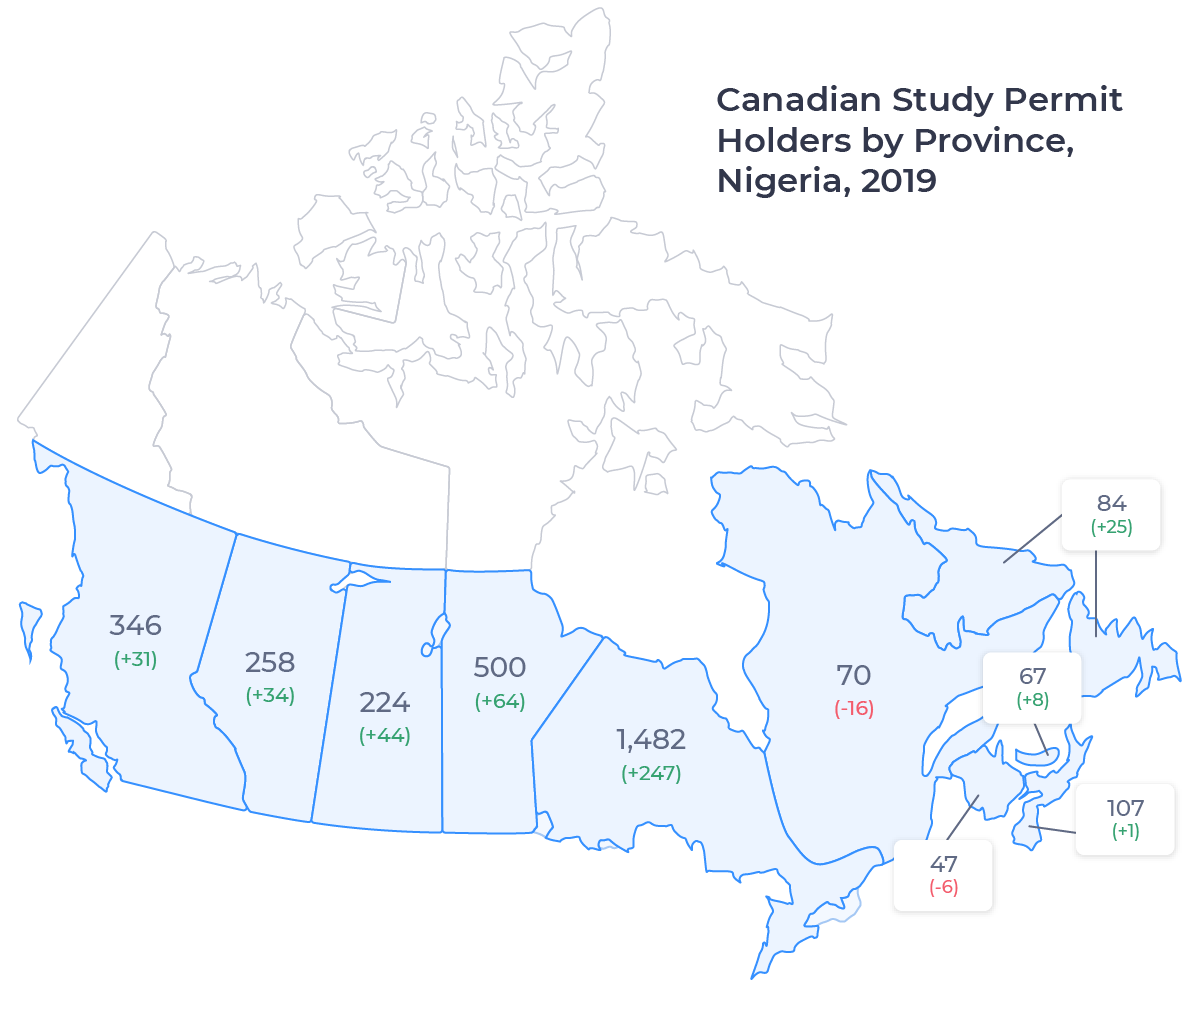 A labelled map of Canada showing how many study permits were issued to Nigerian nationals based on their province of study for 2019